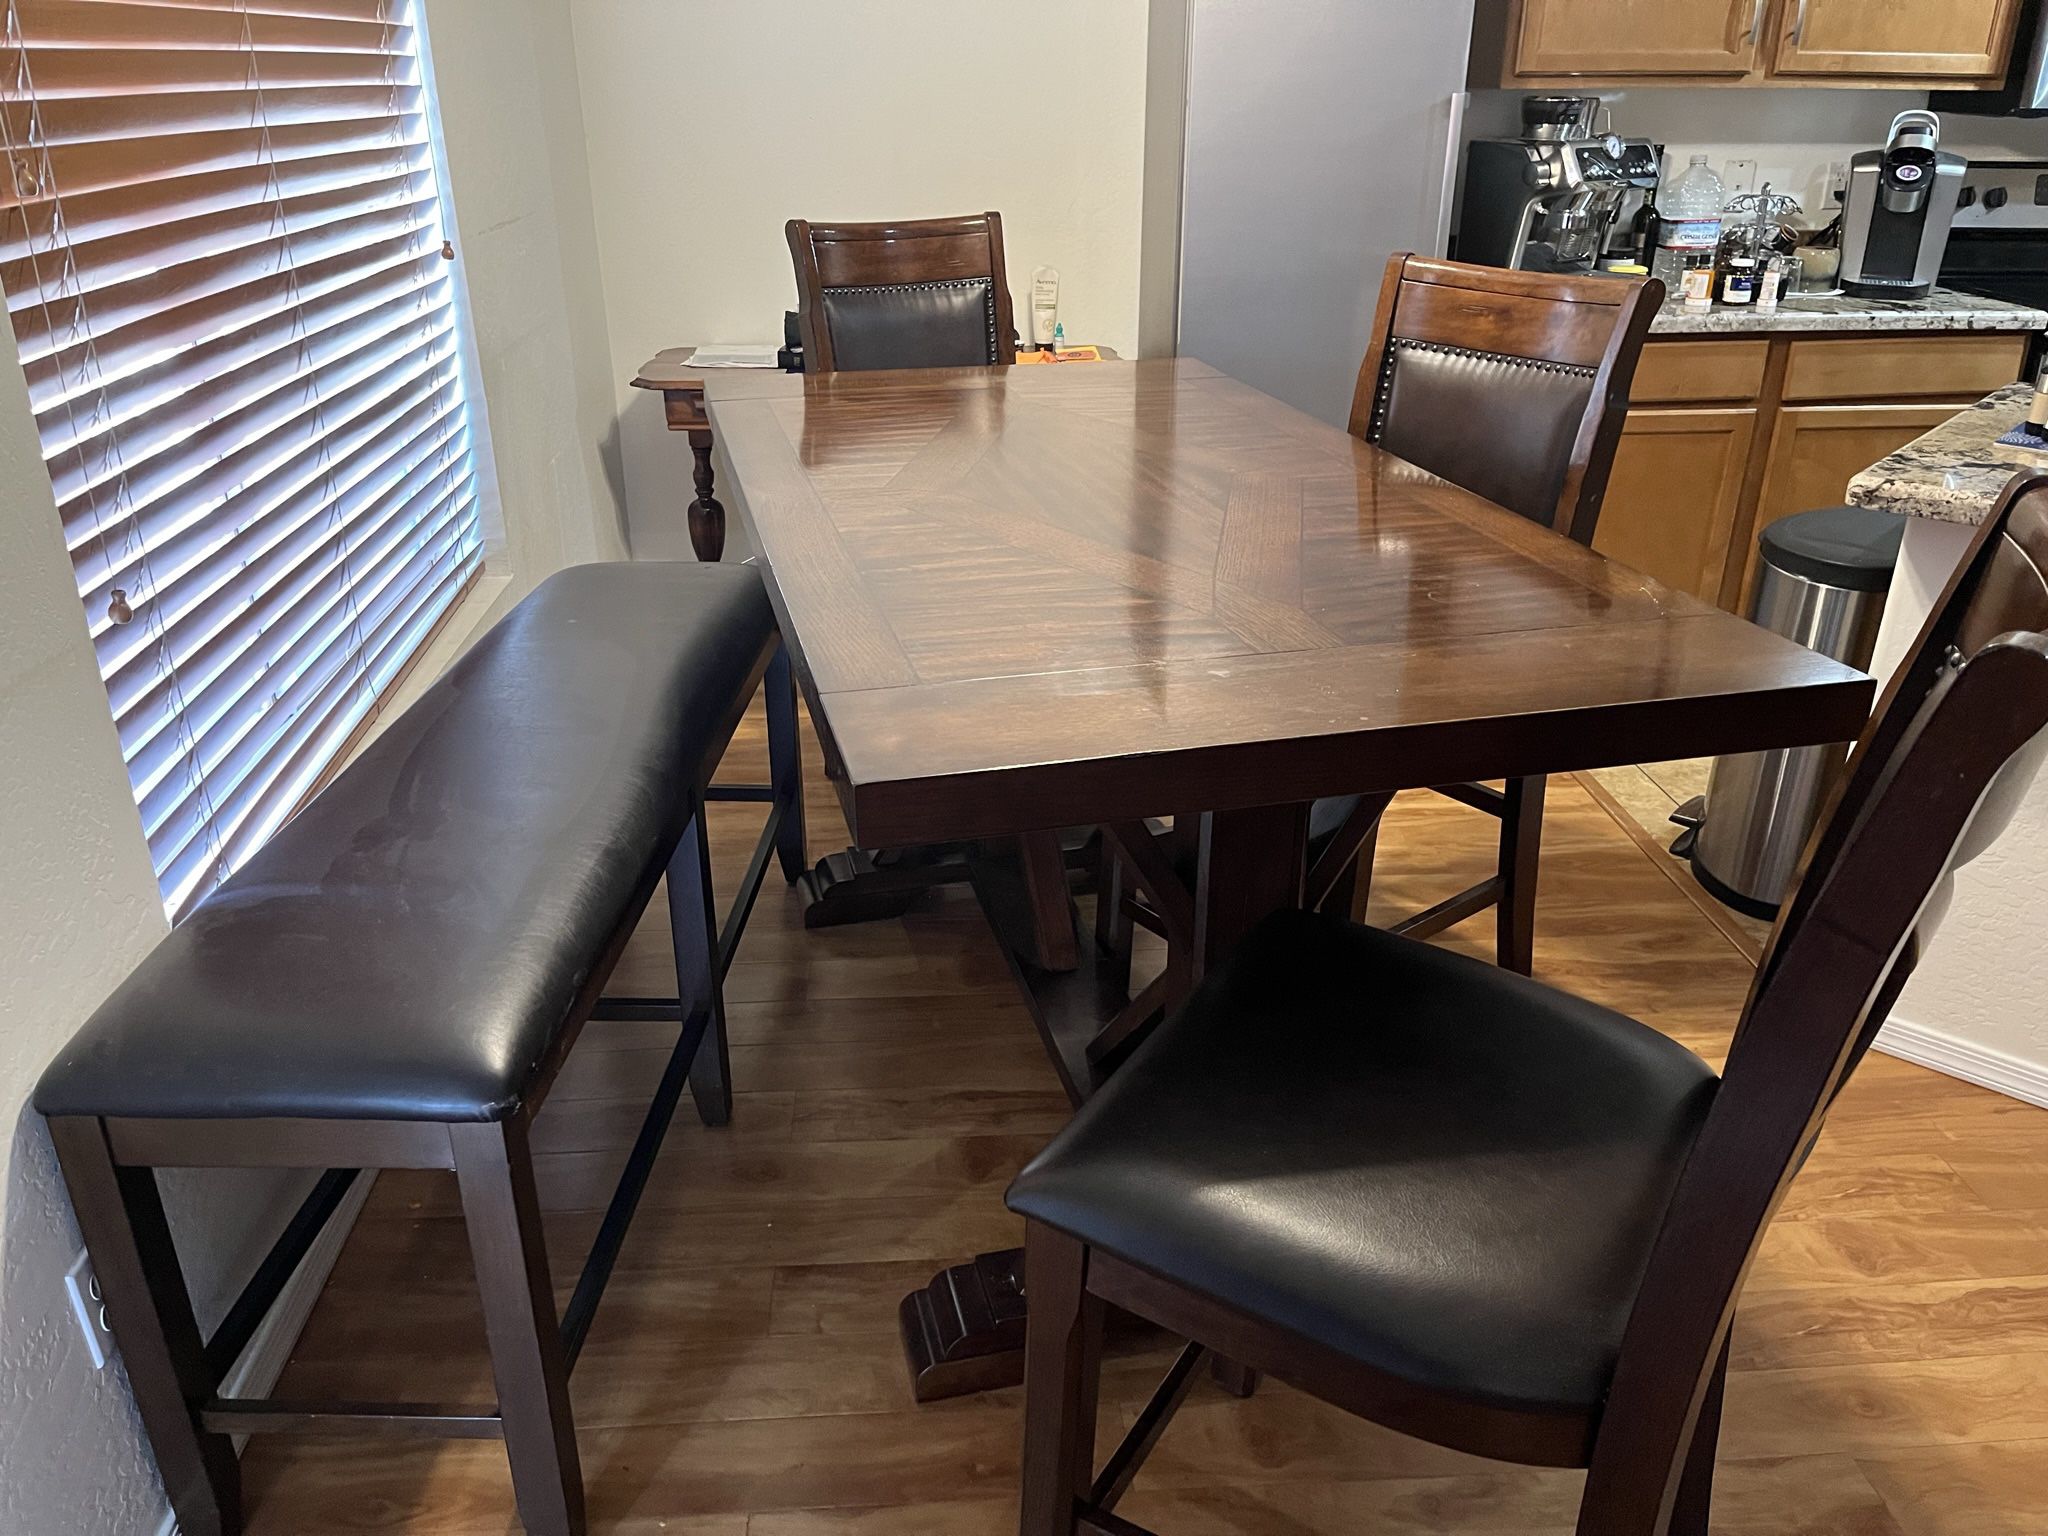 Dining Table Chairs And Bench For SALE $400 OBO